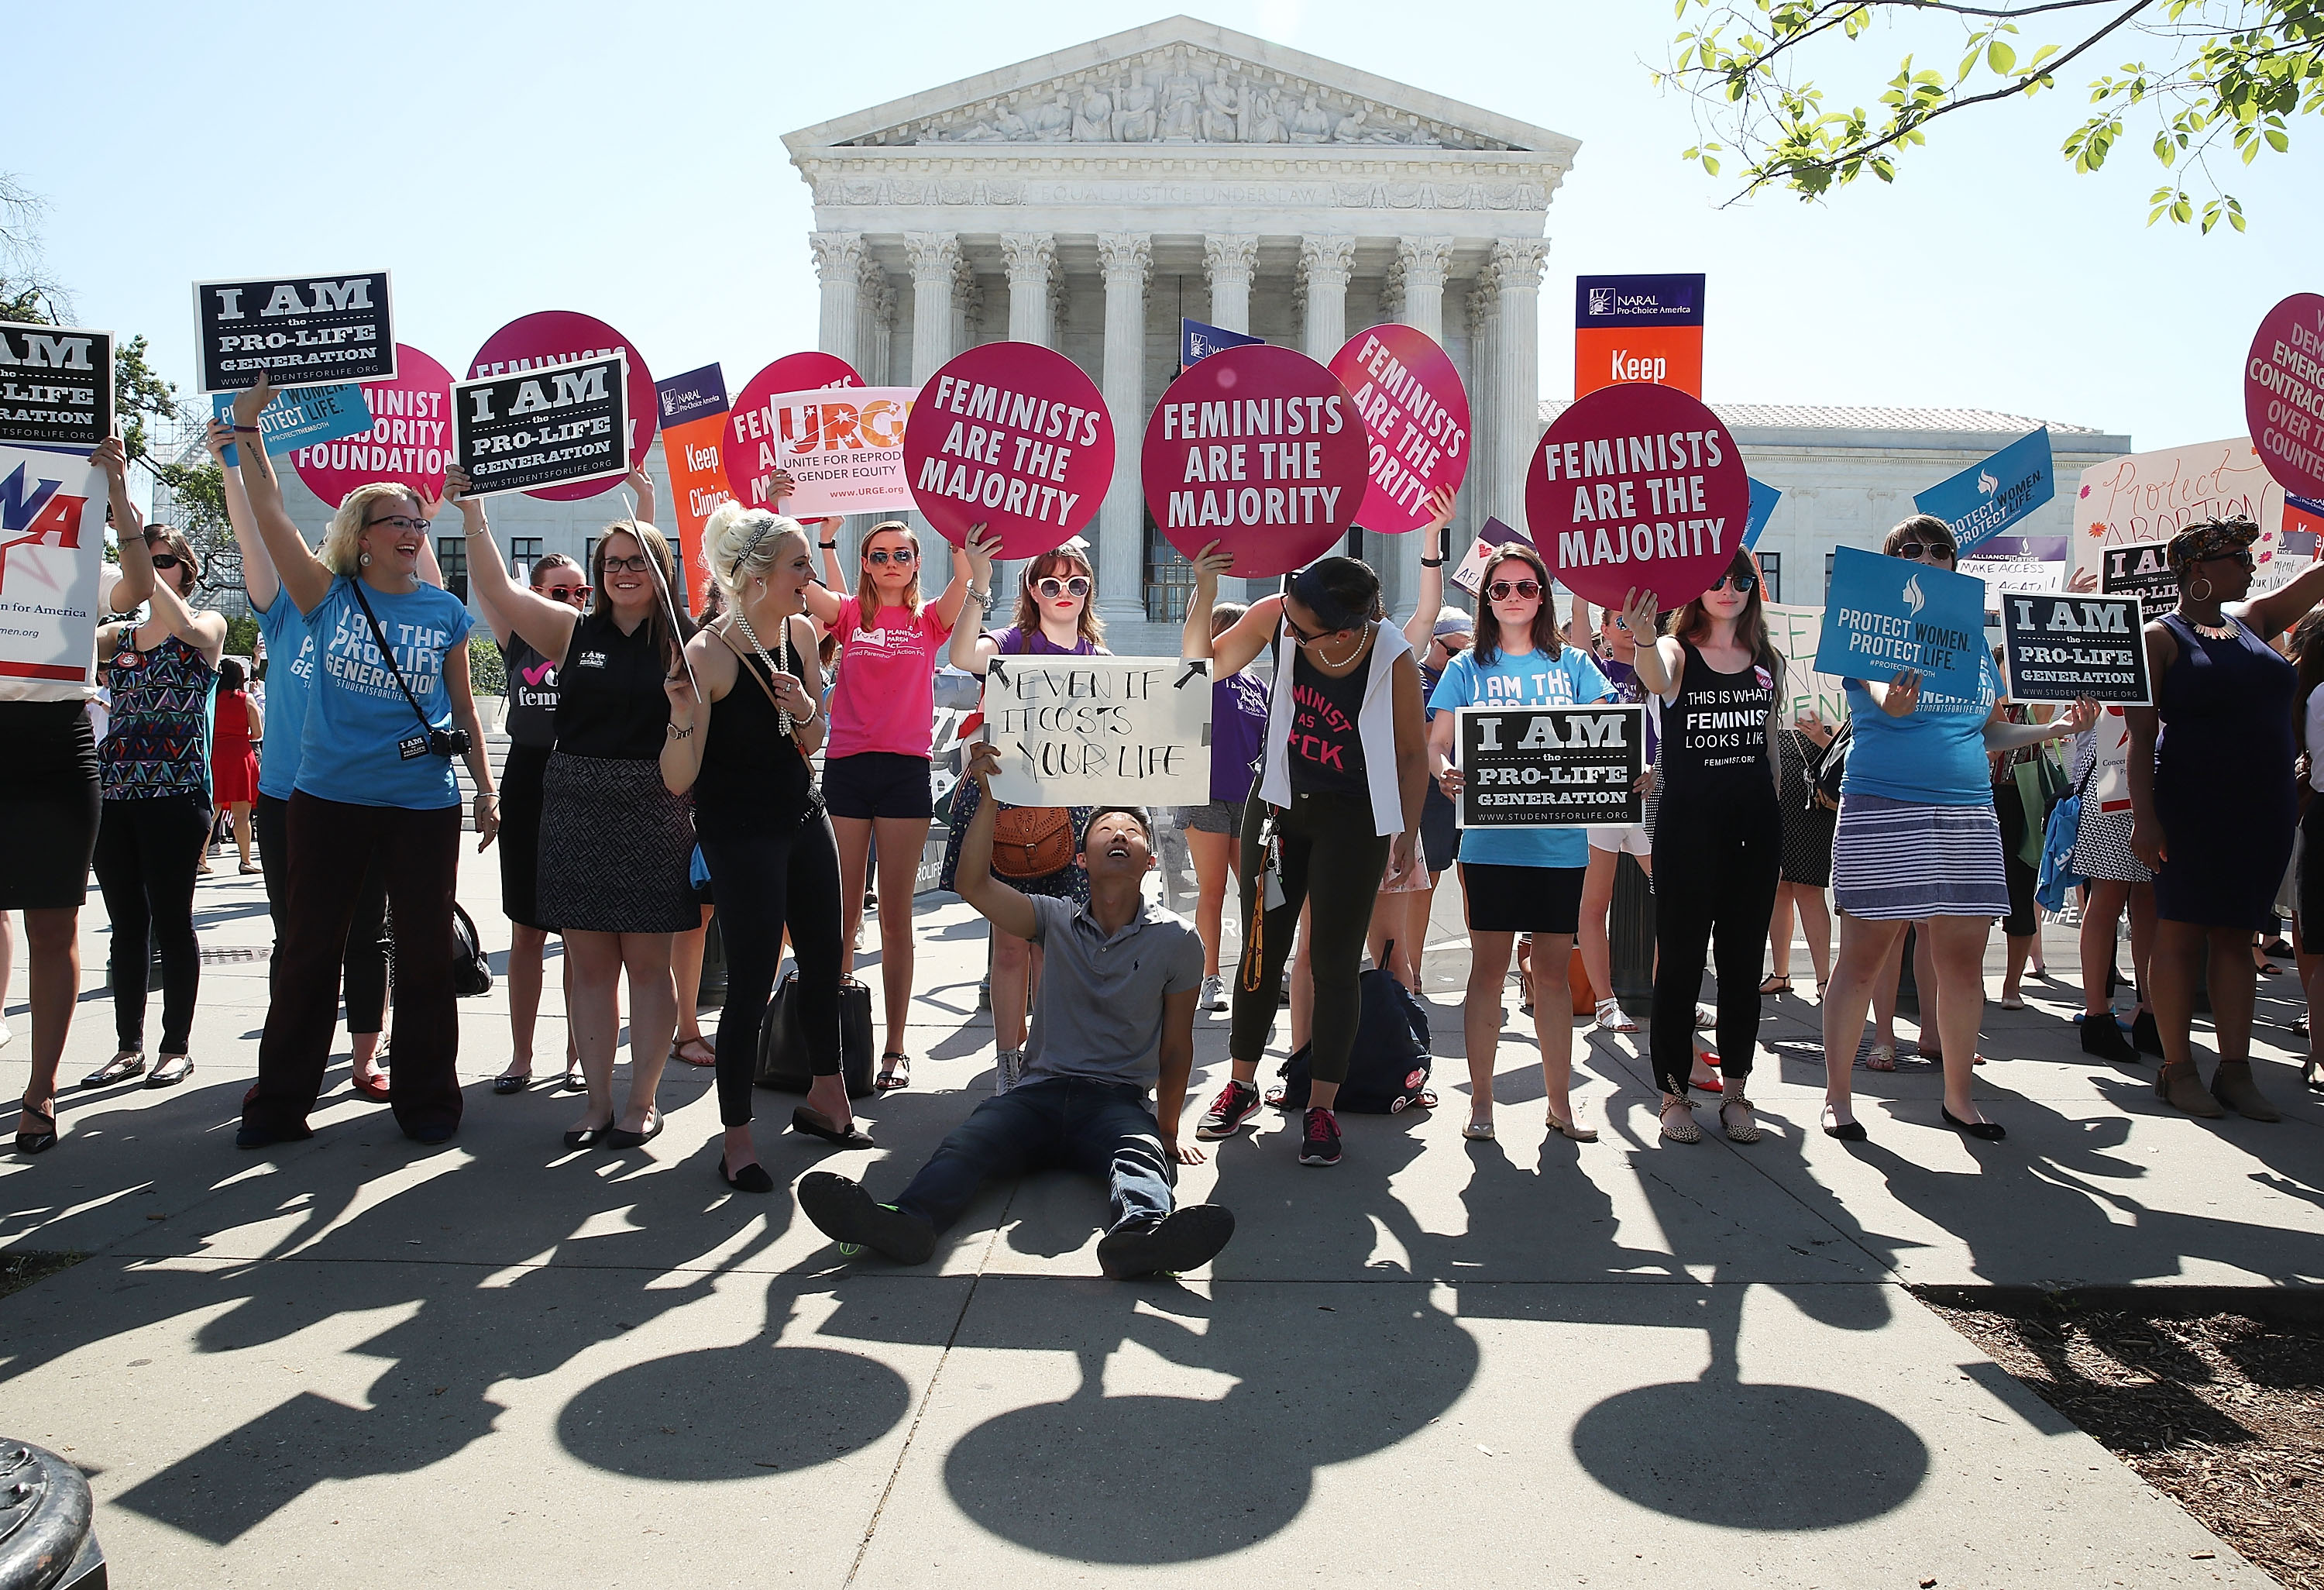 WASHINGTON, DC - JUNE 20:  Protesters on both sides of the abortion issue rally in front of the U.S. Supreme Court building June 20, 2016 in Washington, DC. Several groups are waiting for the high court to hand down the Whole Woman's Health v. Hellerstedt ruling before their summer break next week.  (Photo by Mark Wilson/Getty Images) (Mark Wilson—Getty Images)